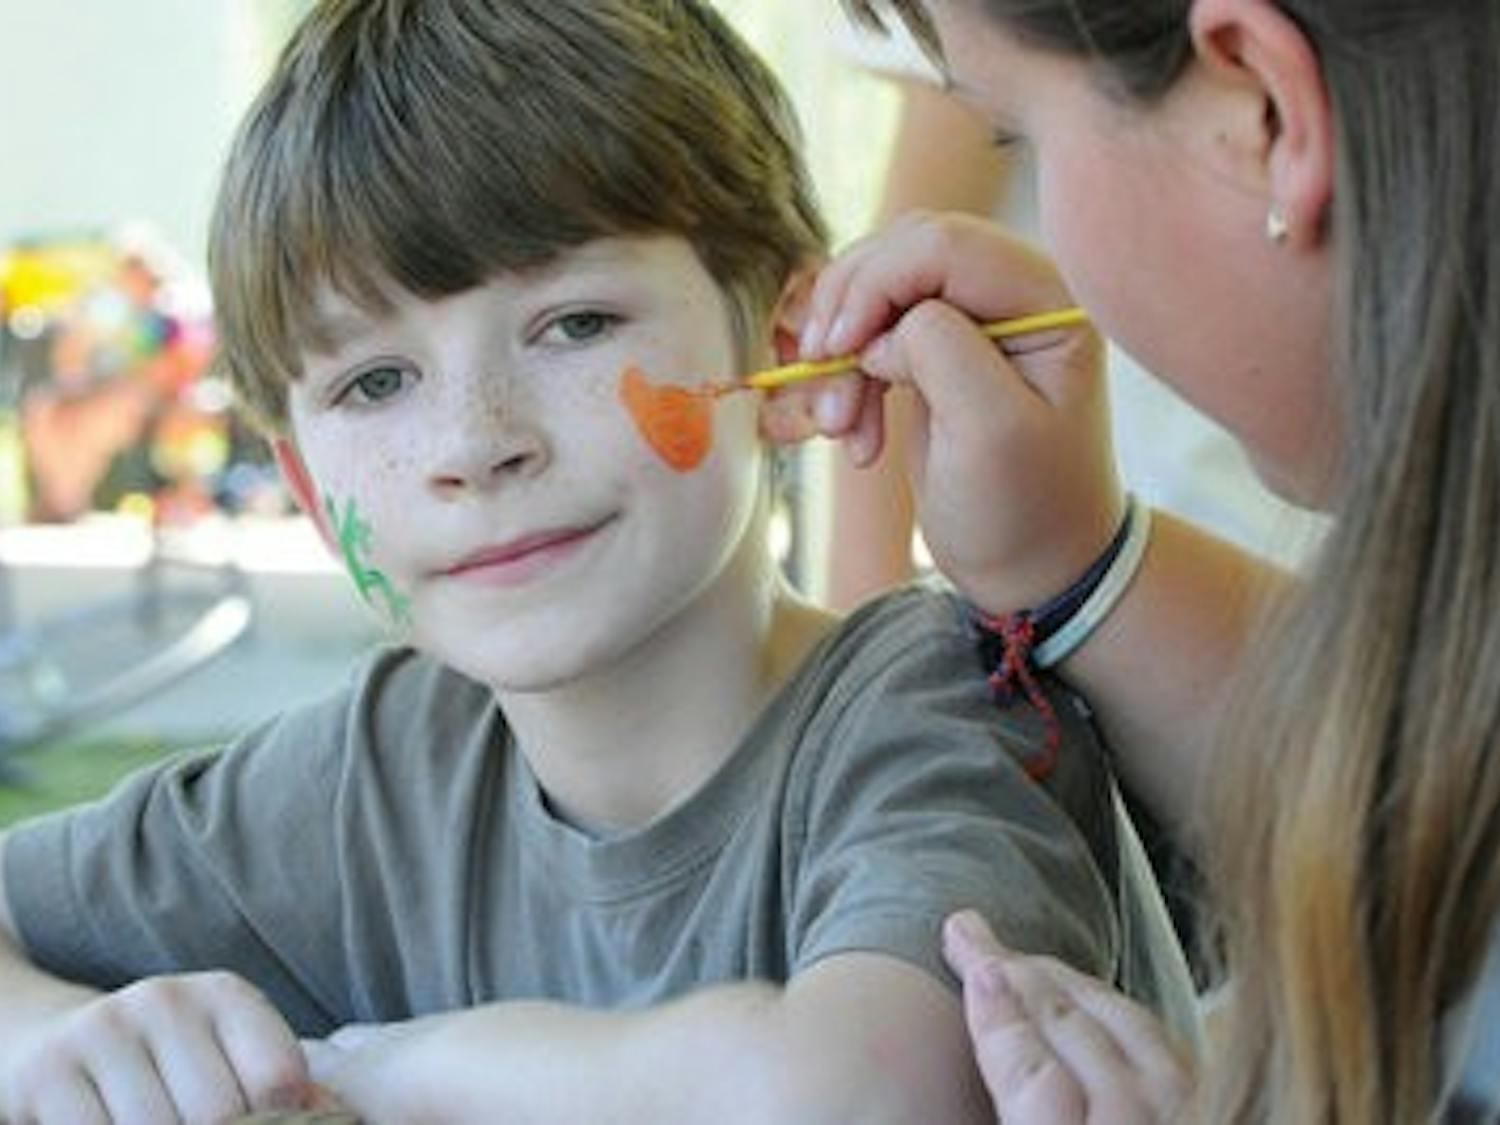 Hunter Sanders, 7, has a tiger painted on his face as part of the activities at the Auburn chapter of International Justice Mission's Freedom Fest at Town Creek Park Sunday. (Christen Harned / ASSISTANT PHOTO EDITOR)